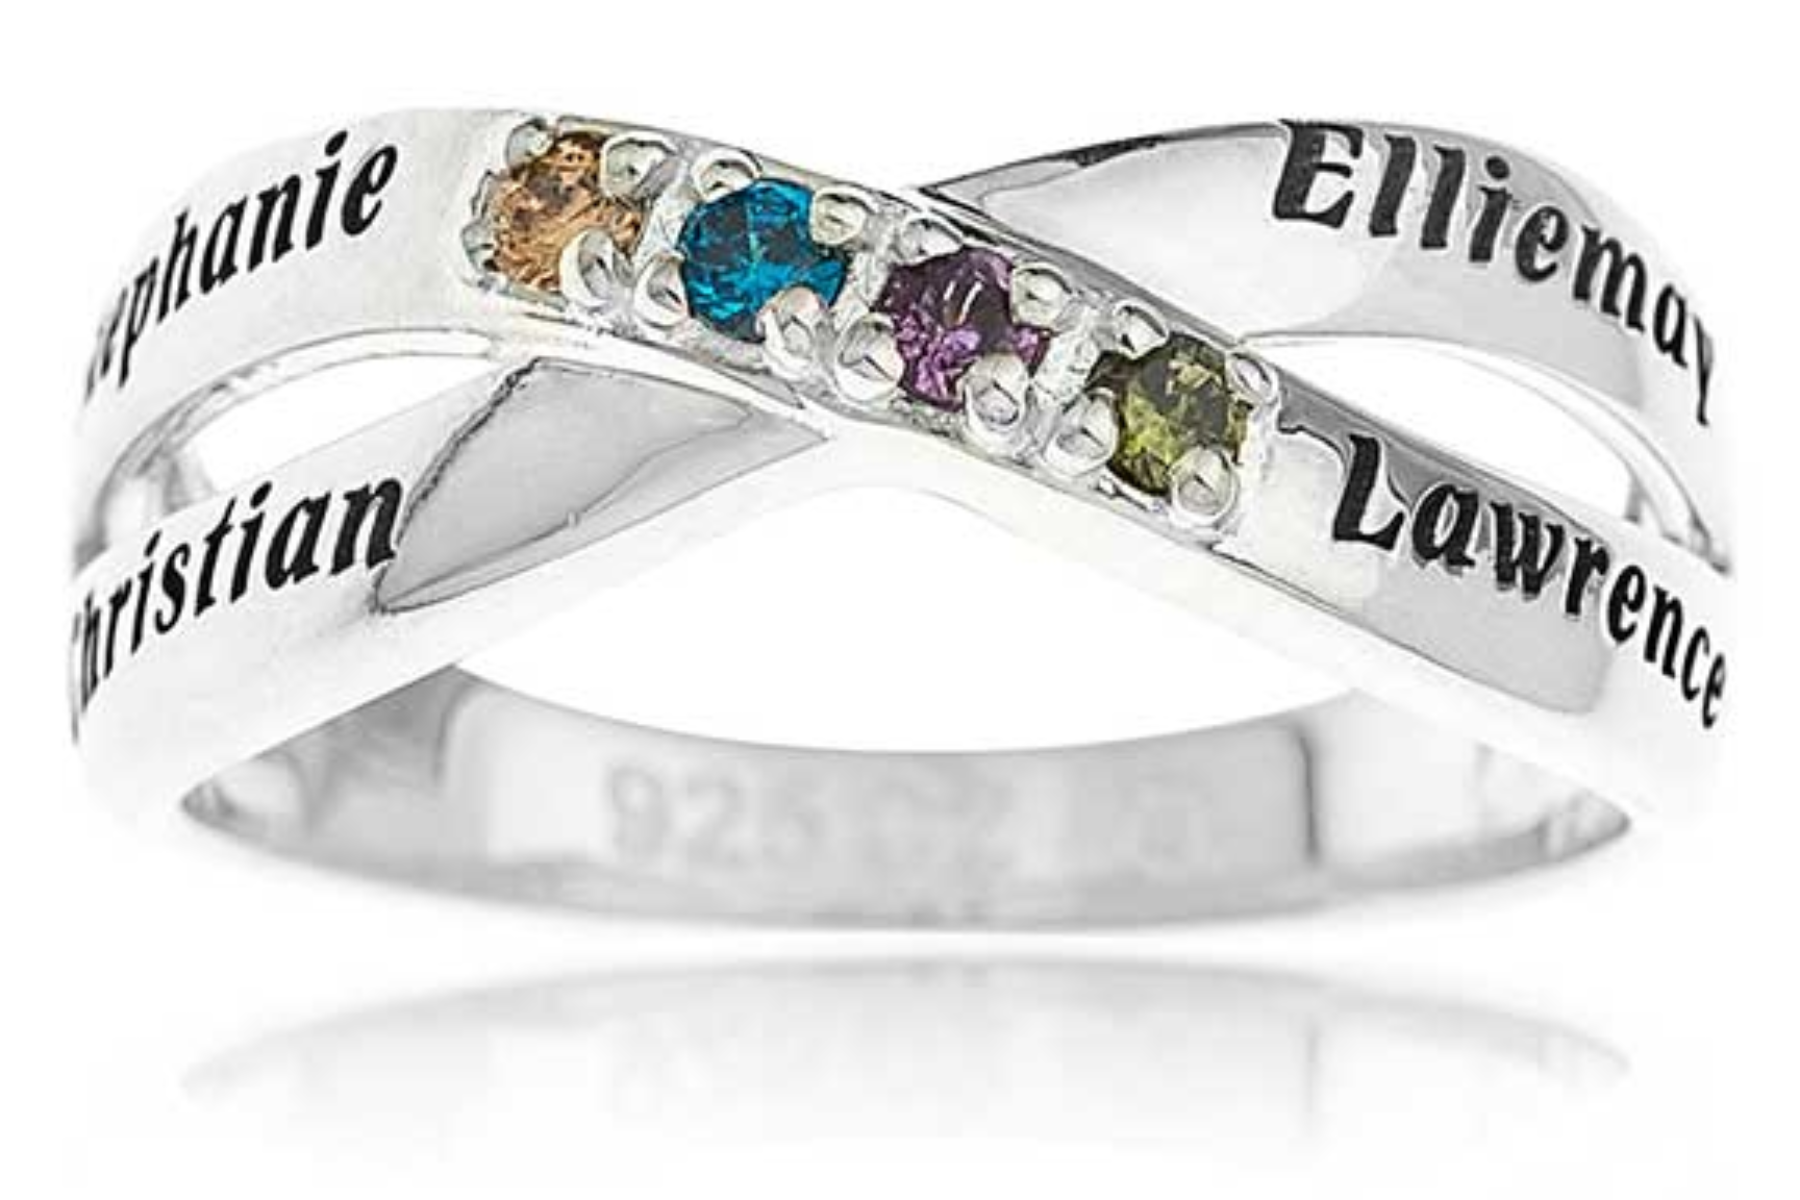 Rings with birthstones and names engraved on them